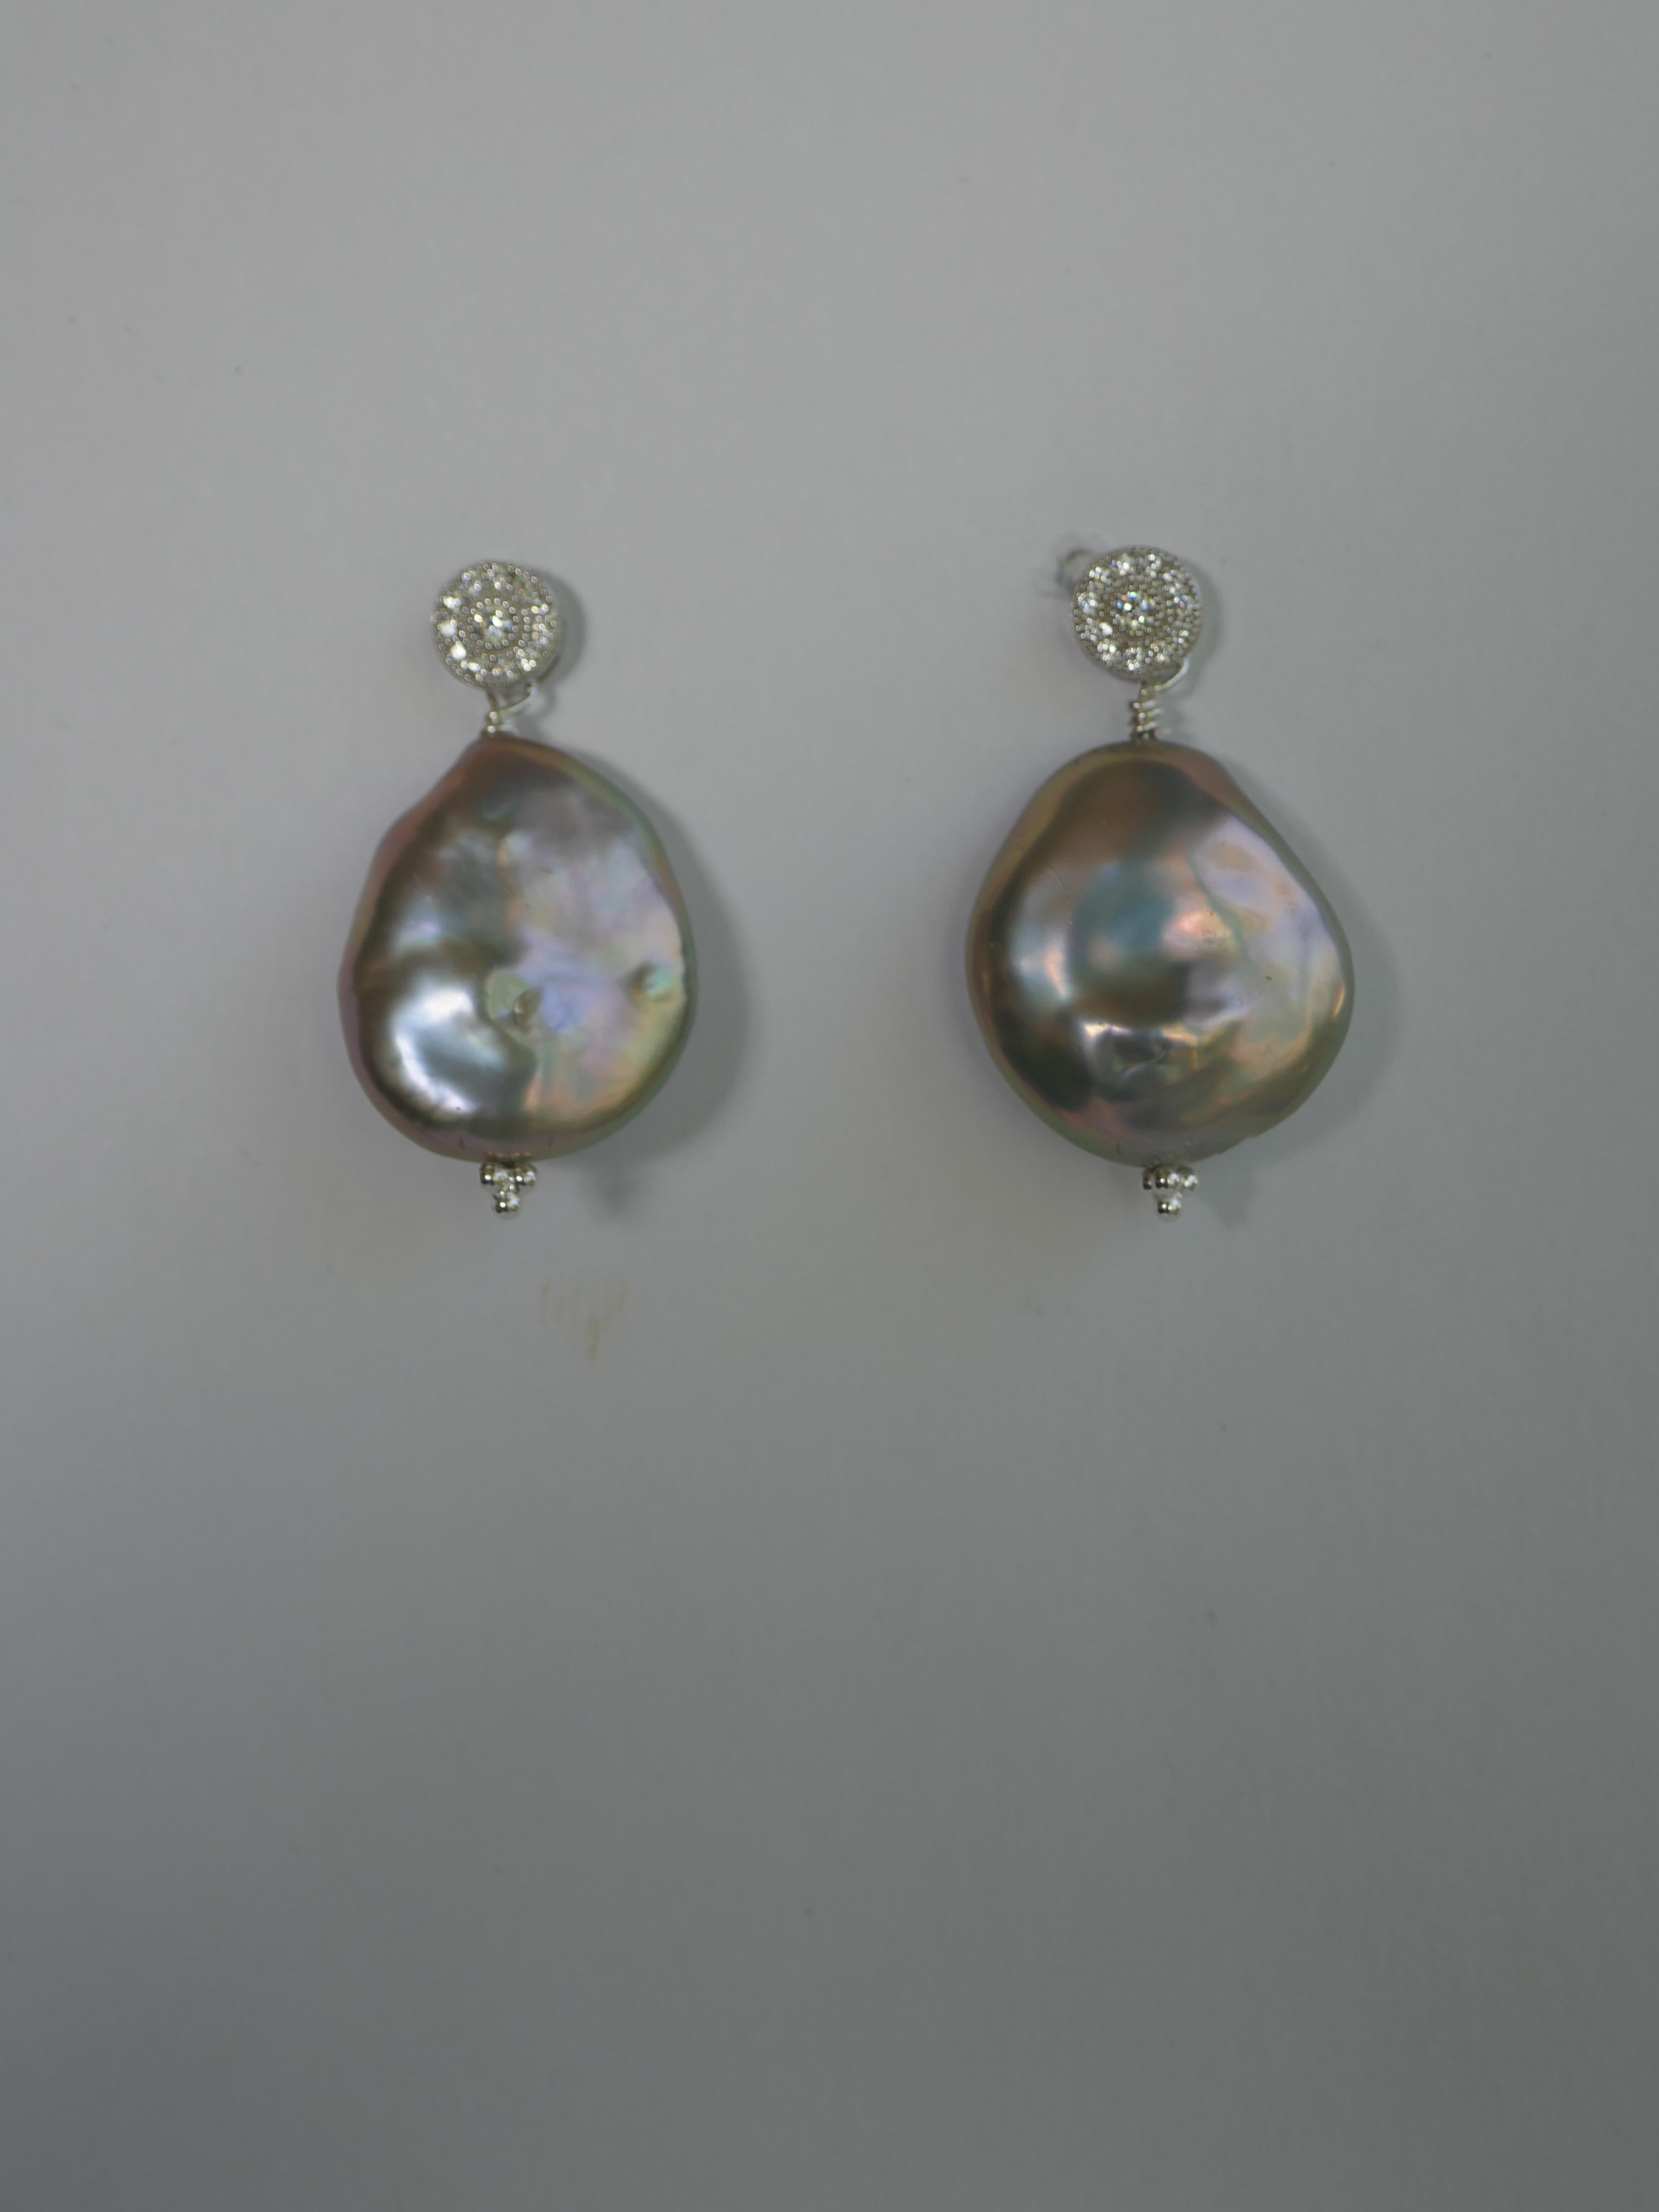 The earrings have two large platinum grey keshi coin cultured pearl on 925 sterling silver cubic zirconia post. The size of the pearls is approximately  22.5mm  x 26mm  The post are screw back but rubber backs may be used. The earrings are 1 3/8 